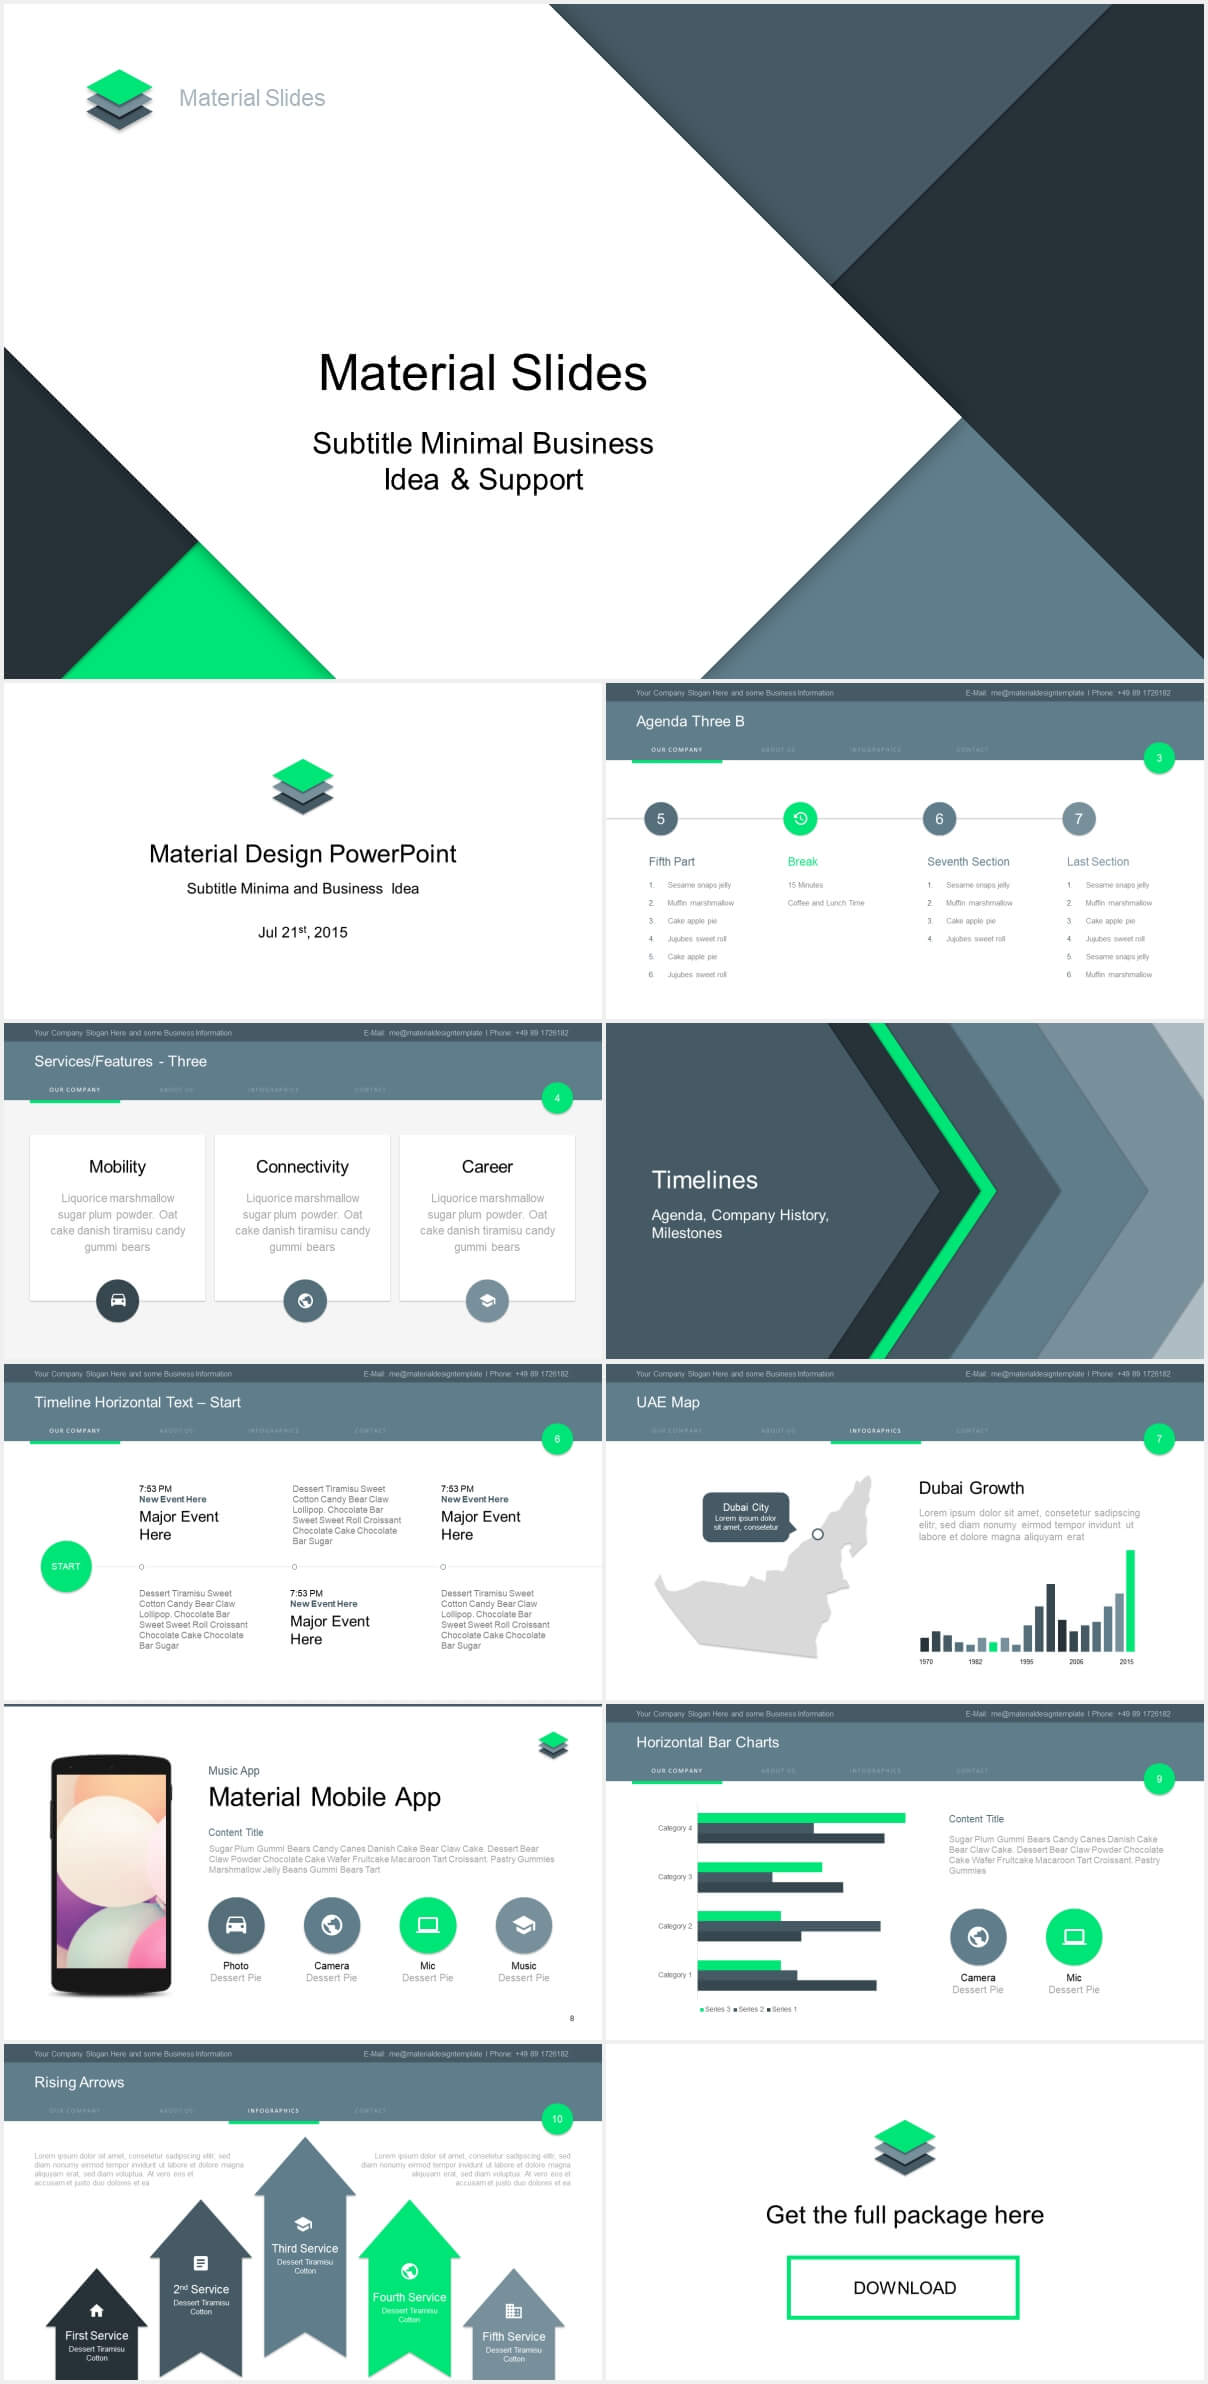 Material Design Powerpoint Template – Just Free Slides With How To Design A Powerpoint Template